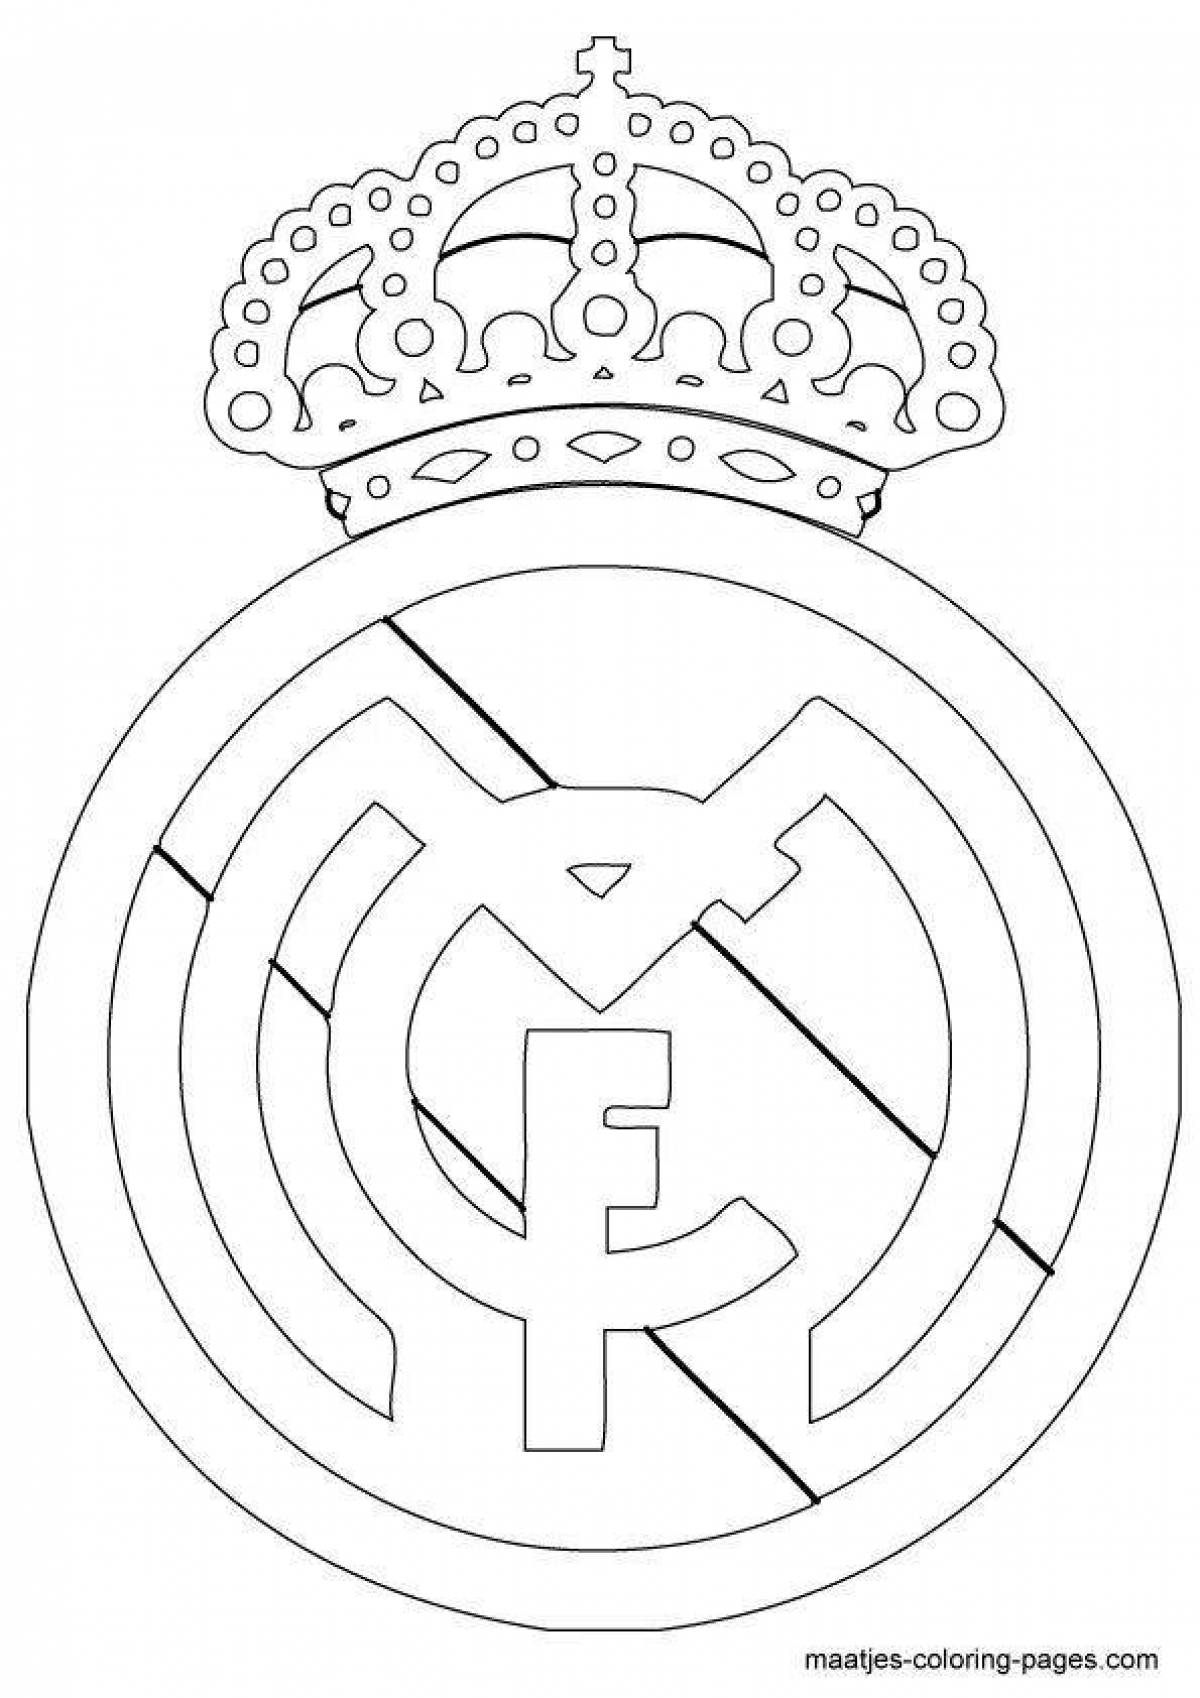 Fancy real madrid coloring book